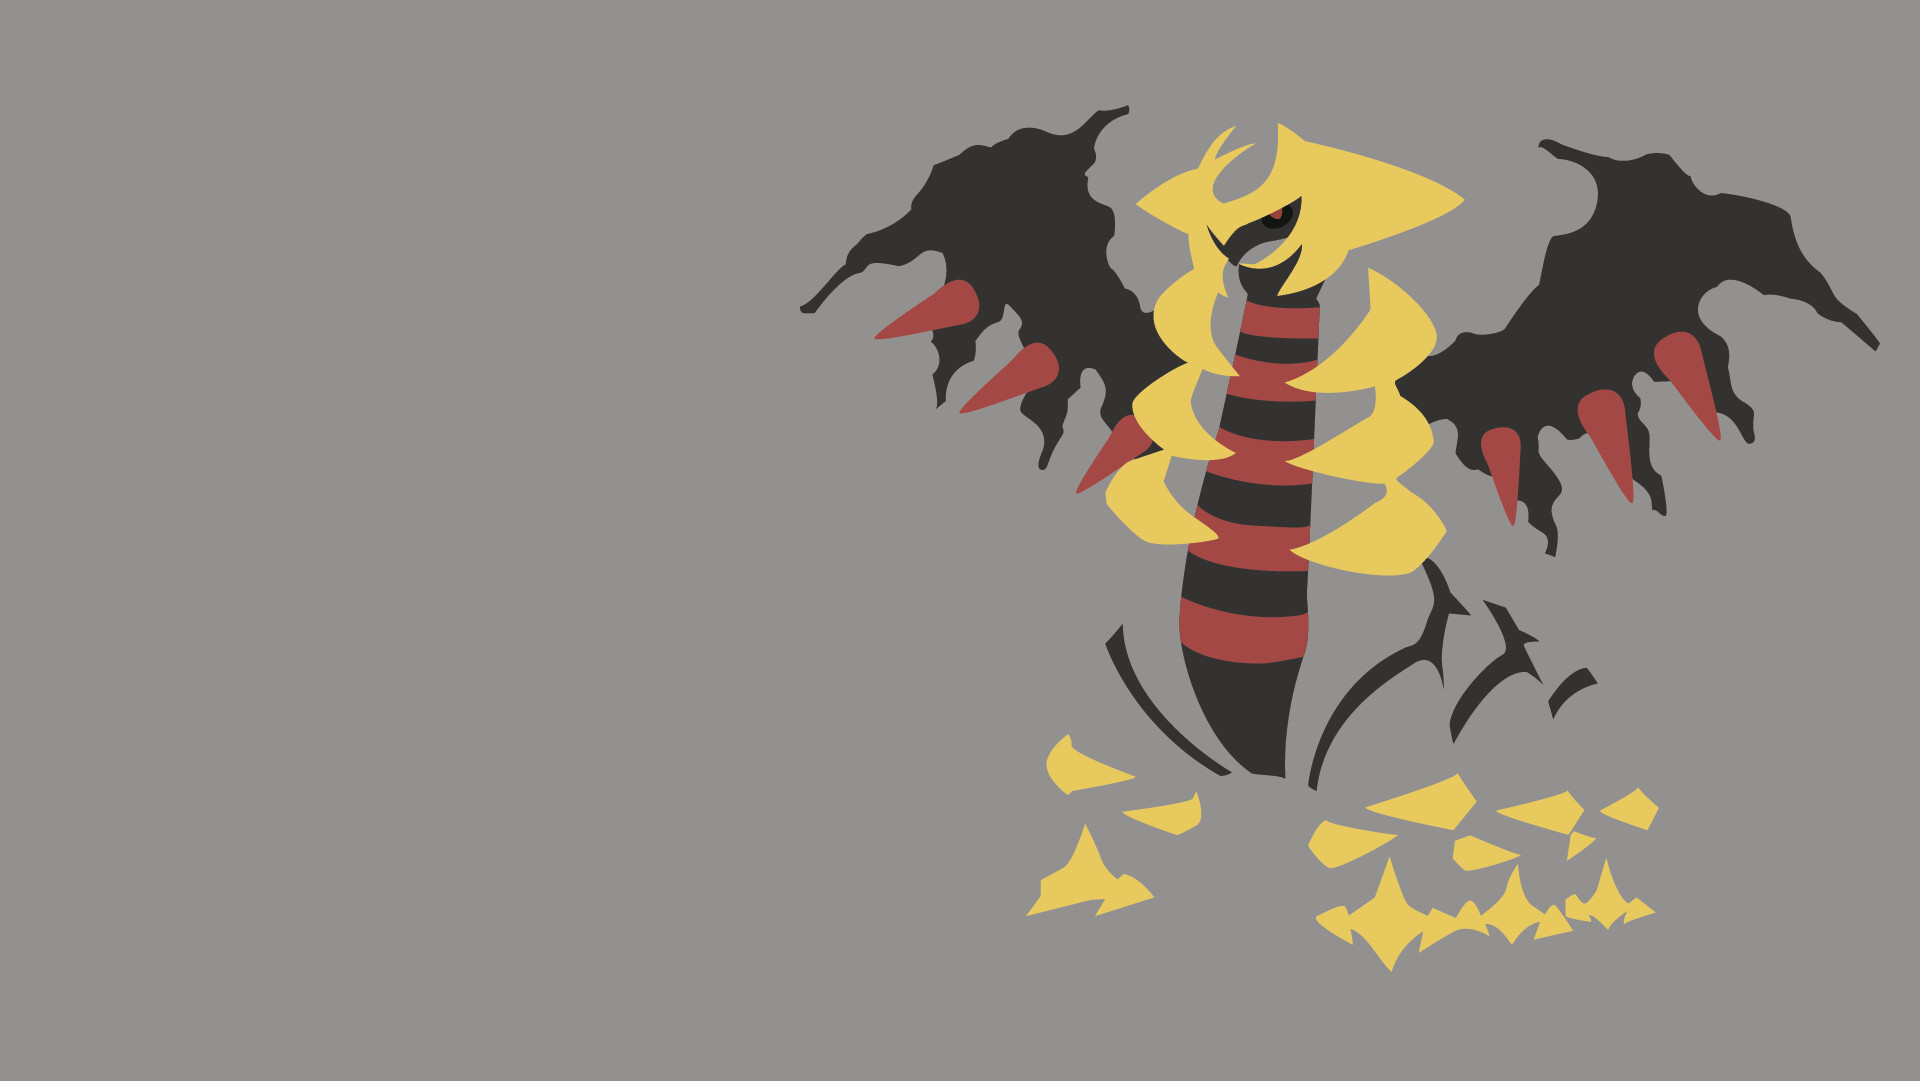 Giratina: Wings changing shape as if made of a liquid or gas, Six legs with golden claws. 1920x1090 HD Wallpaper.